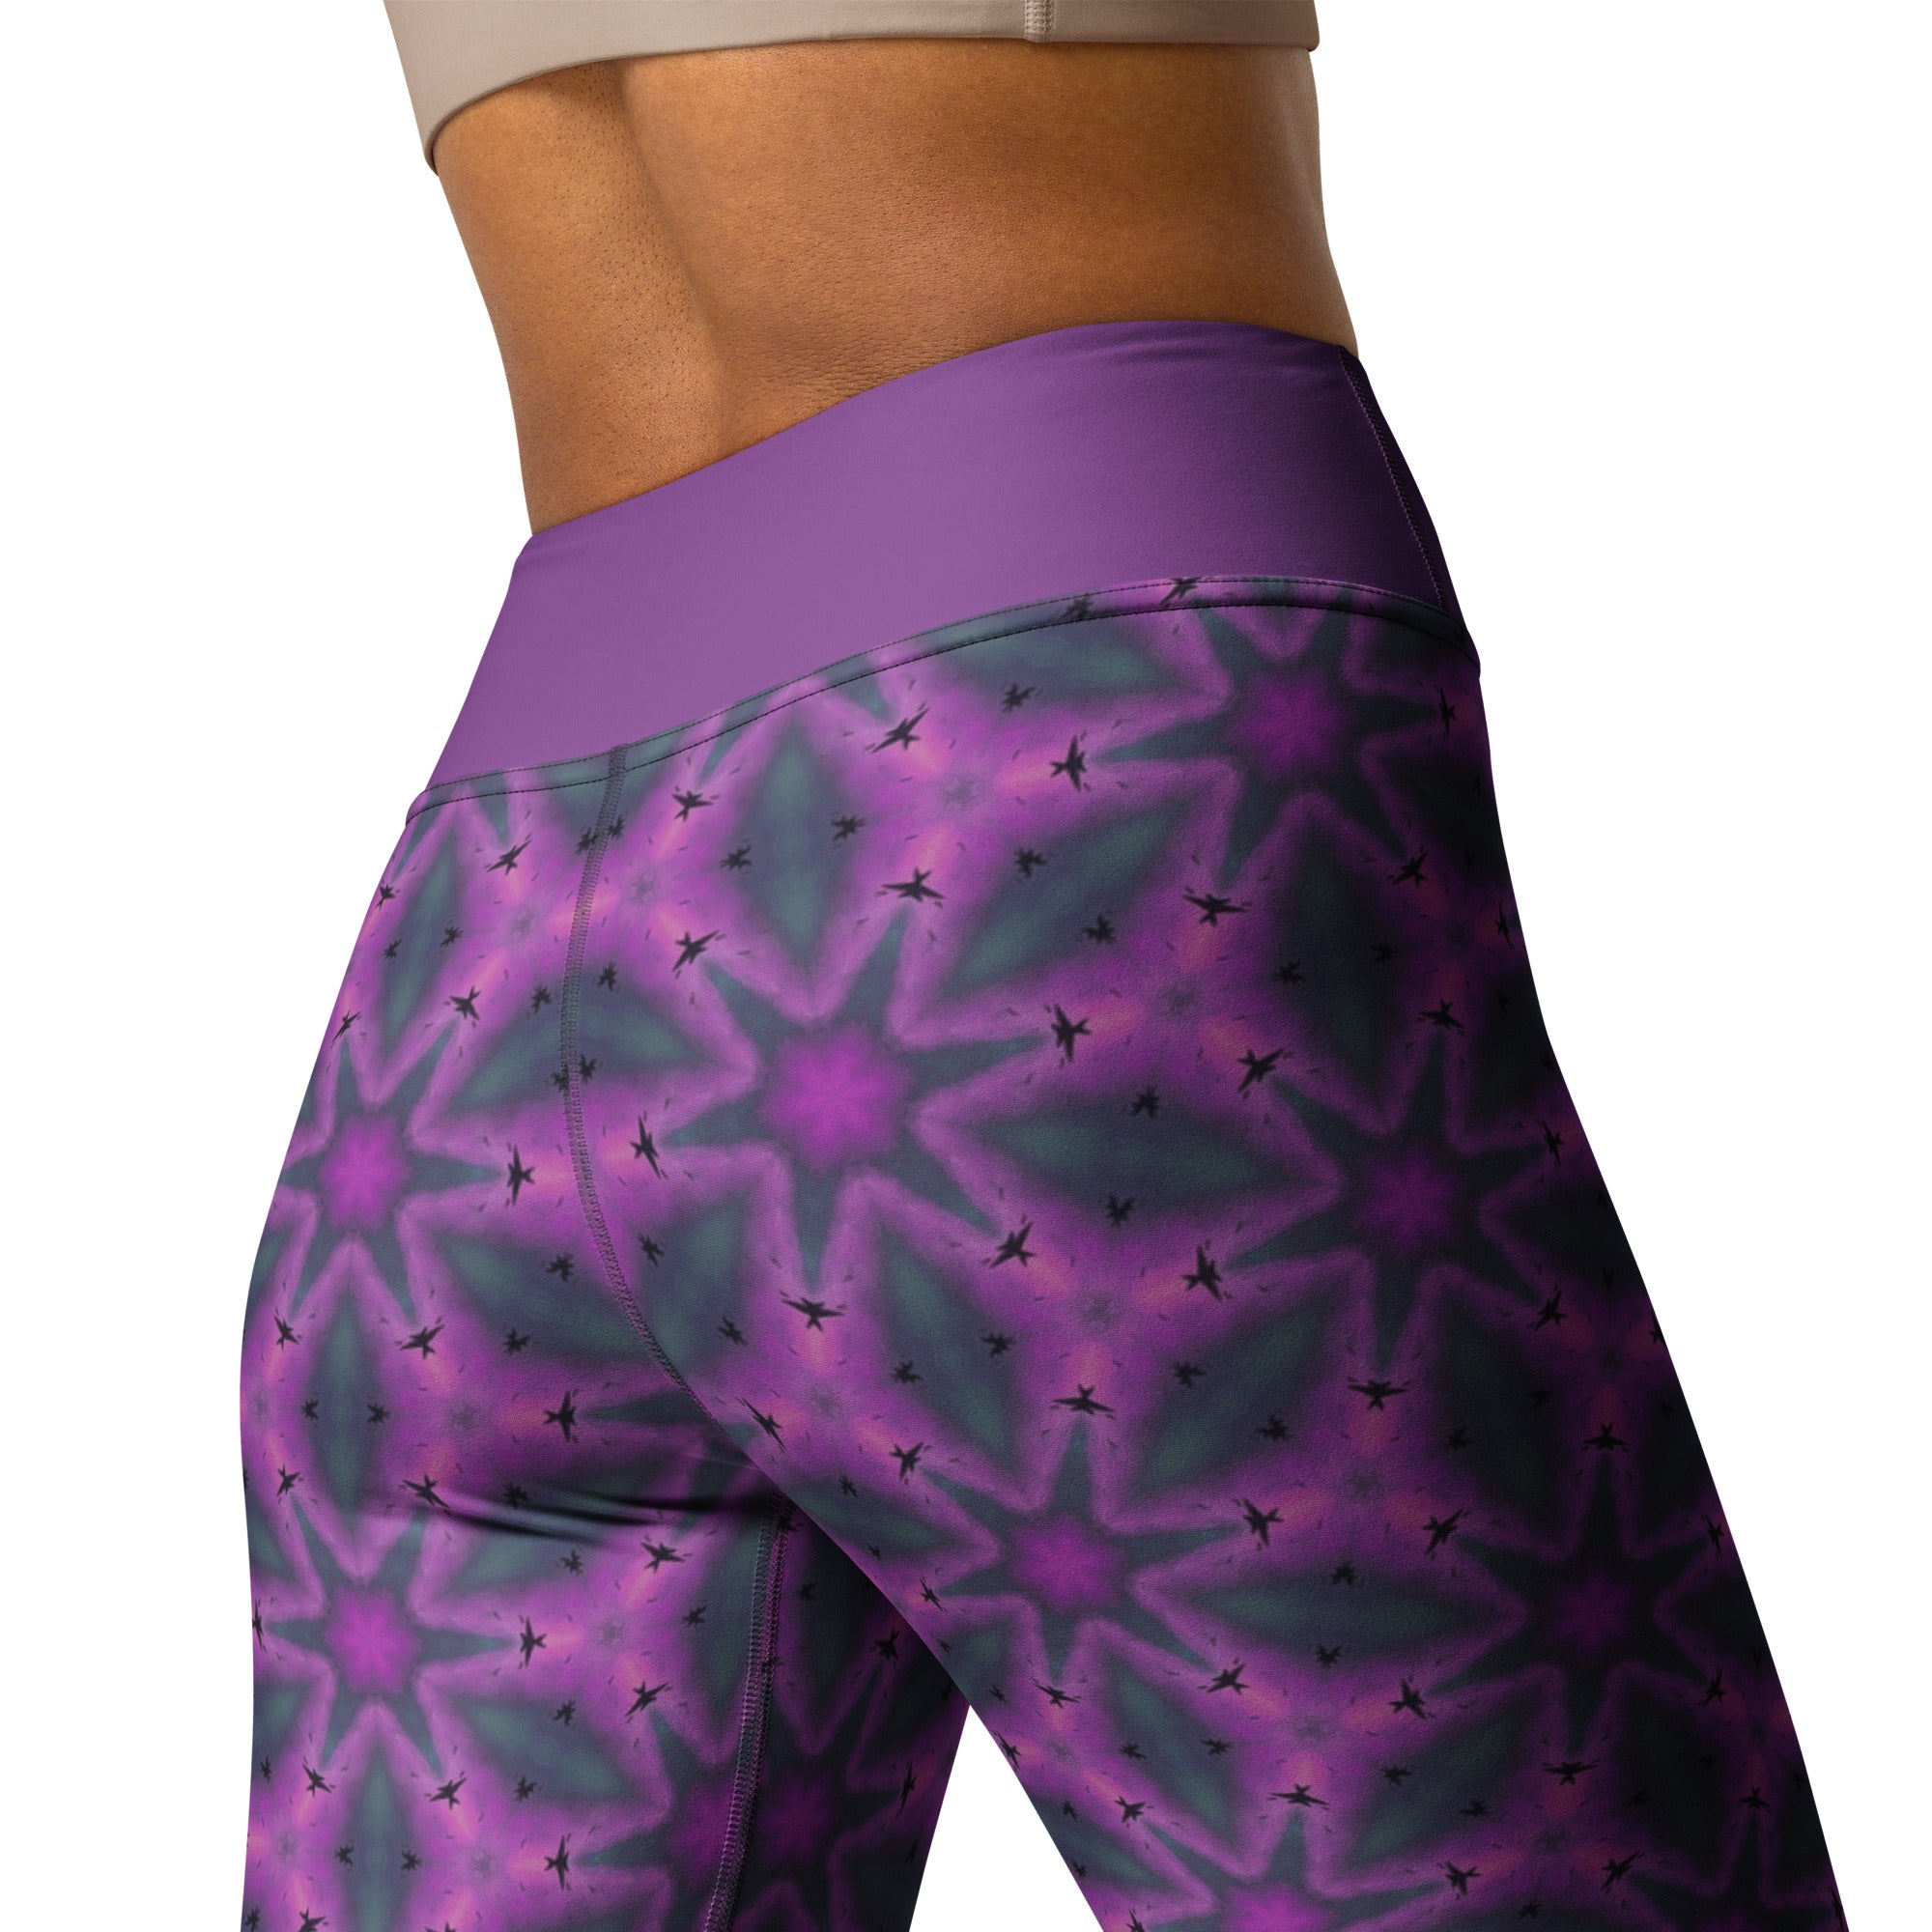 Full-length view of Floral Bliss Yoga Leggings for fitness enthusiasts